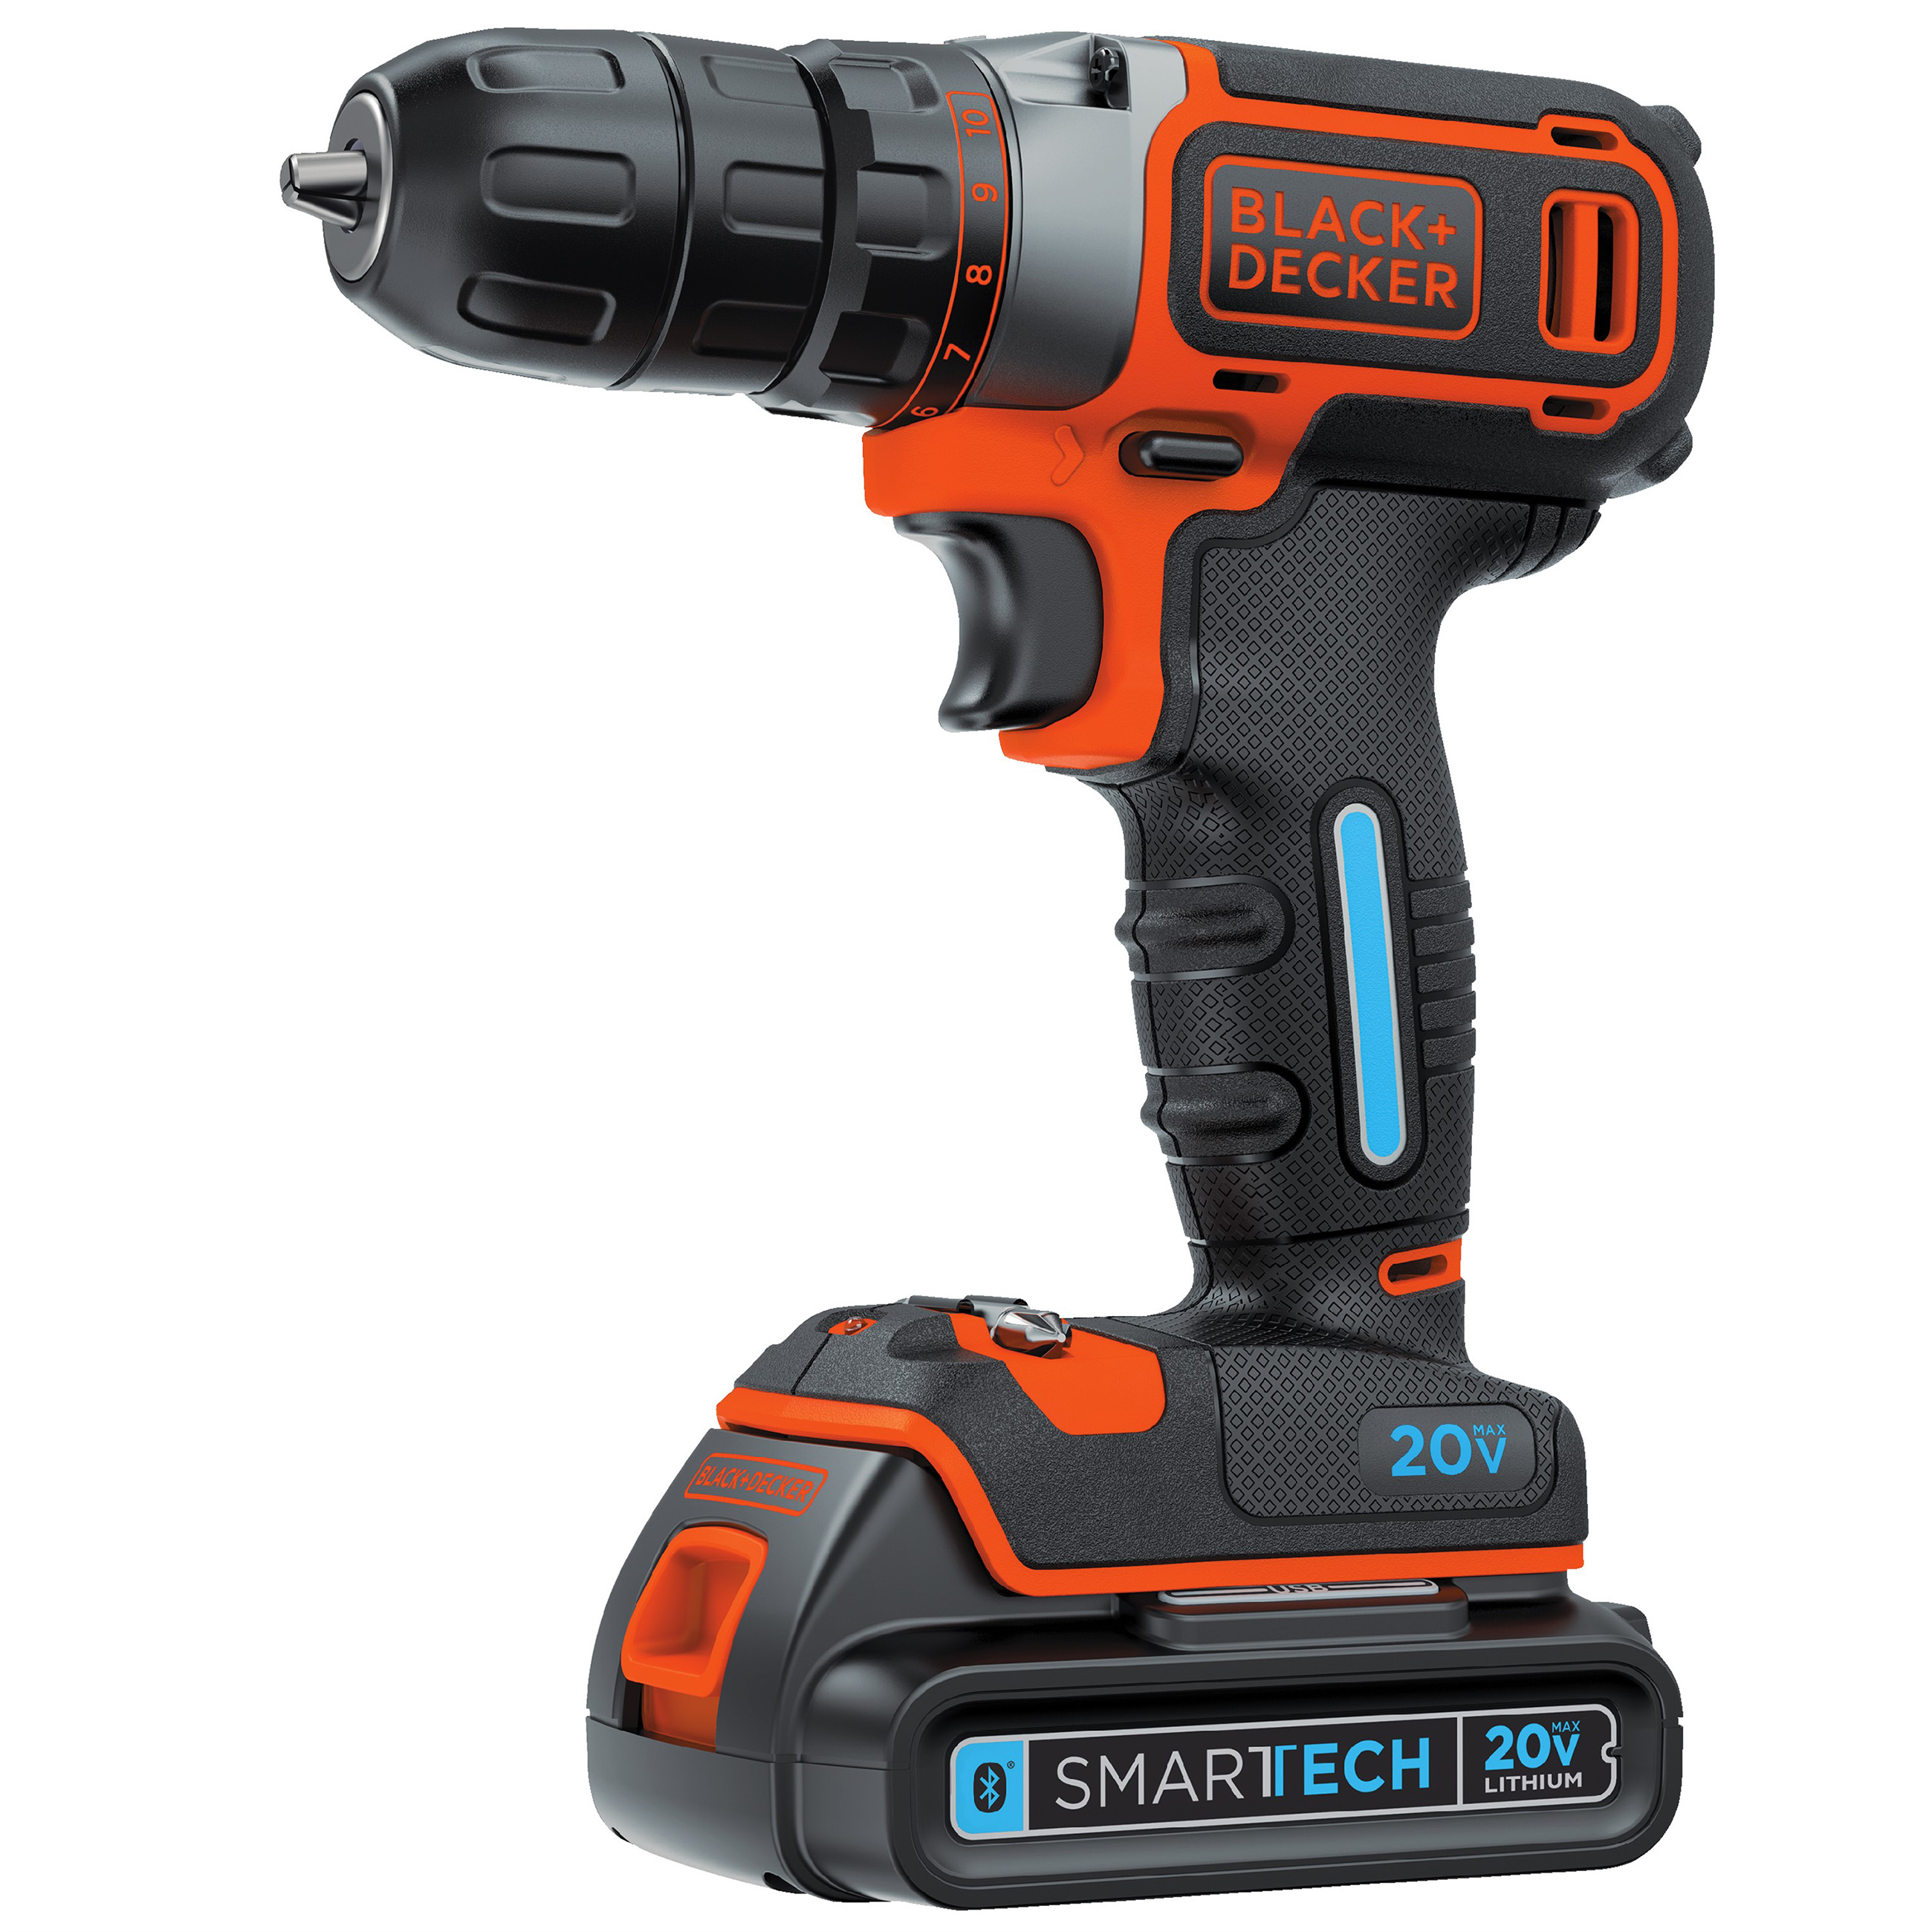 BLACK+DECKER™’s Drill with SMARTECH™ Battery retails for approximately $79 MSRP and SMARTECH™ Batteries alone retail for approximately $69 MSRP.